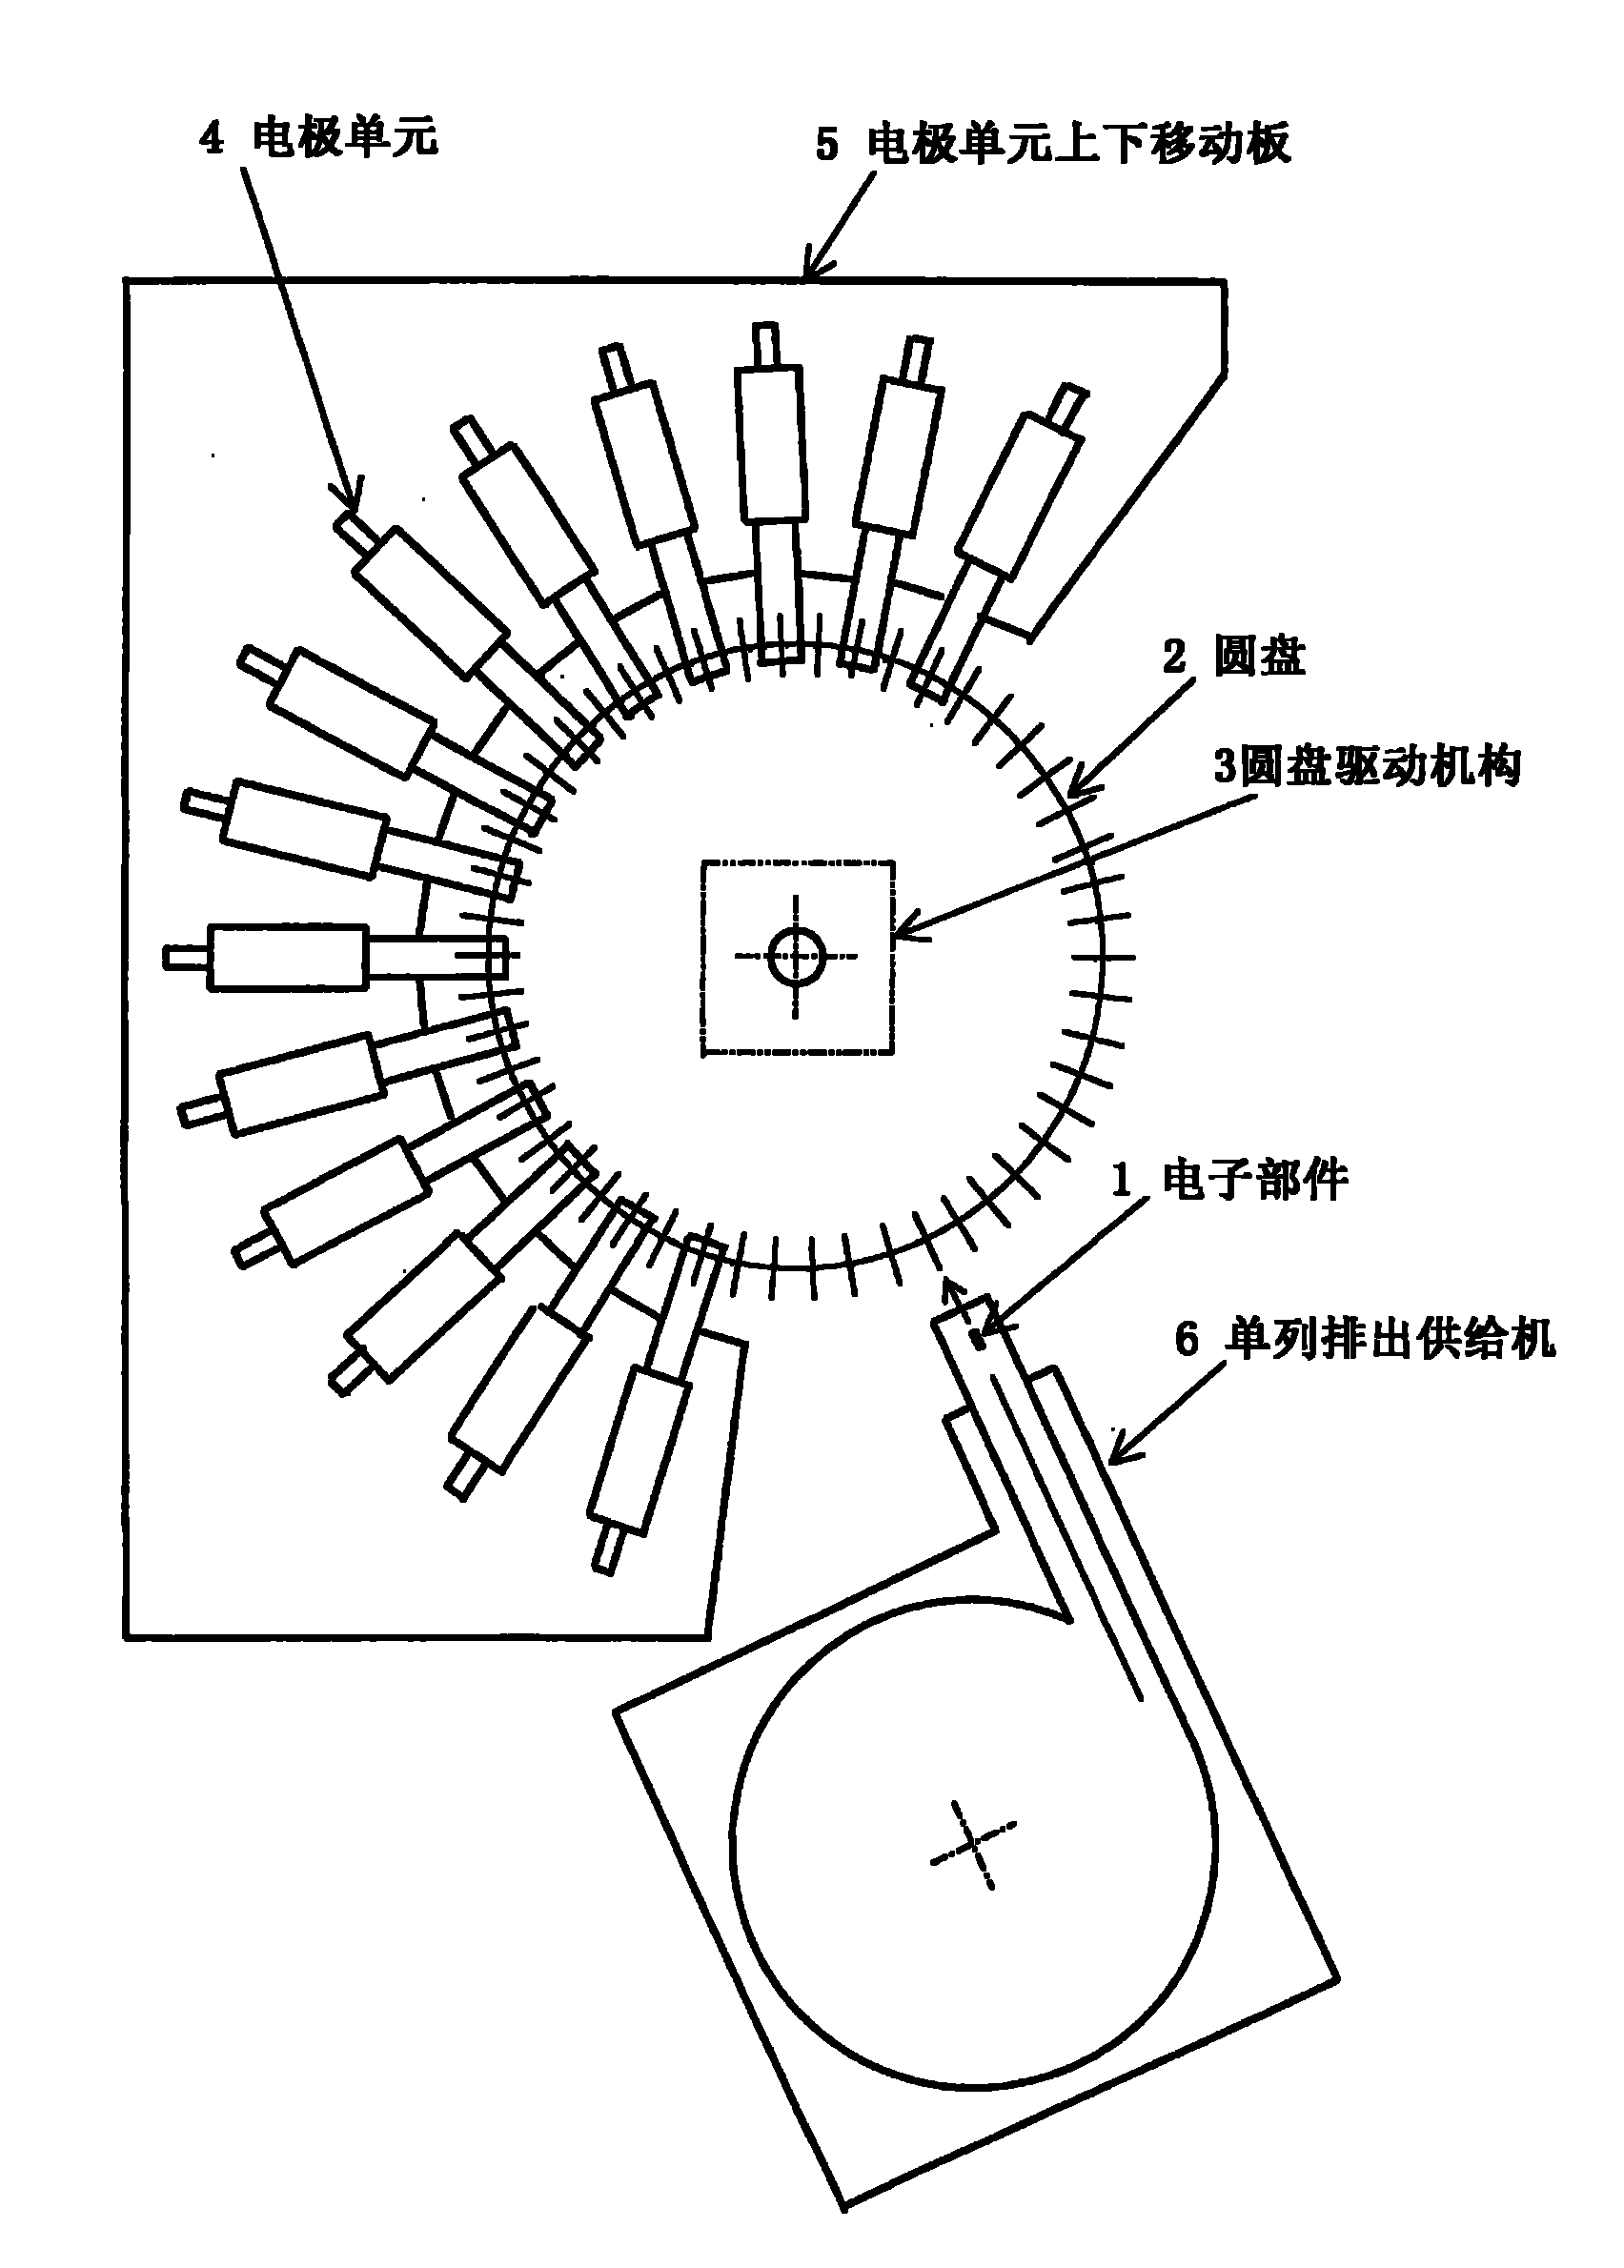 Apparatus for characteristic inspection and sorting of electronic component